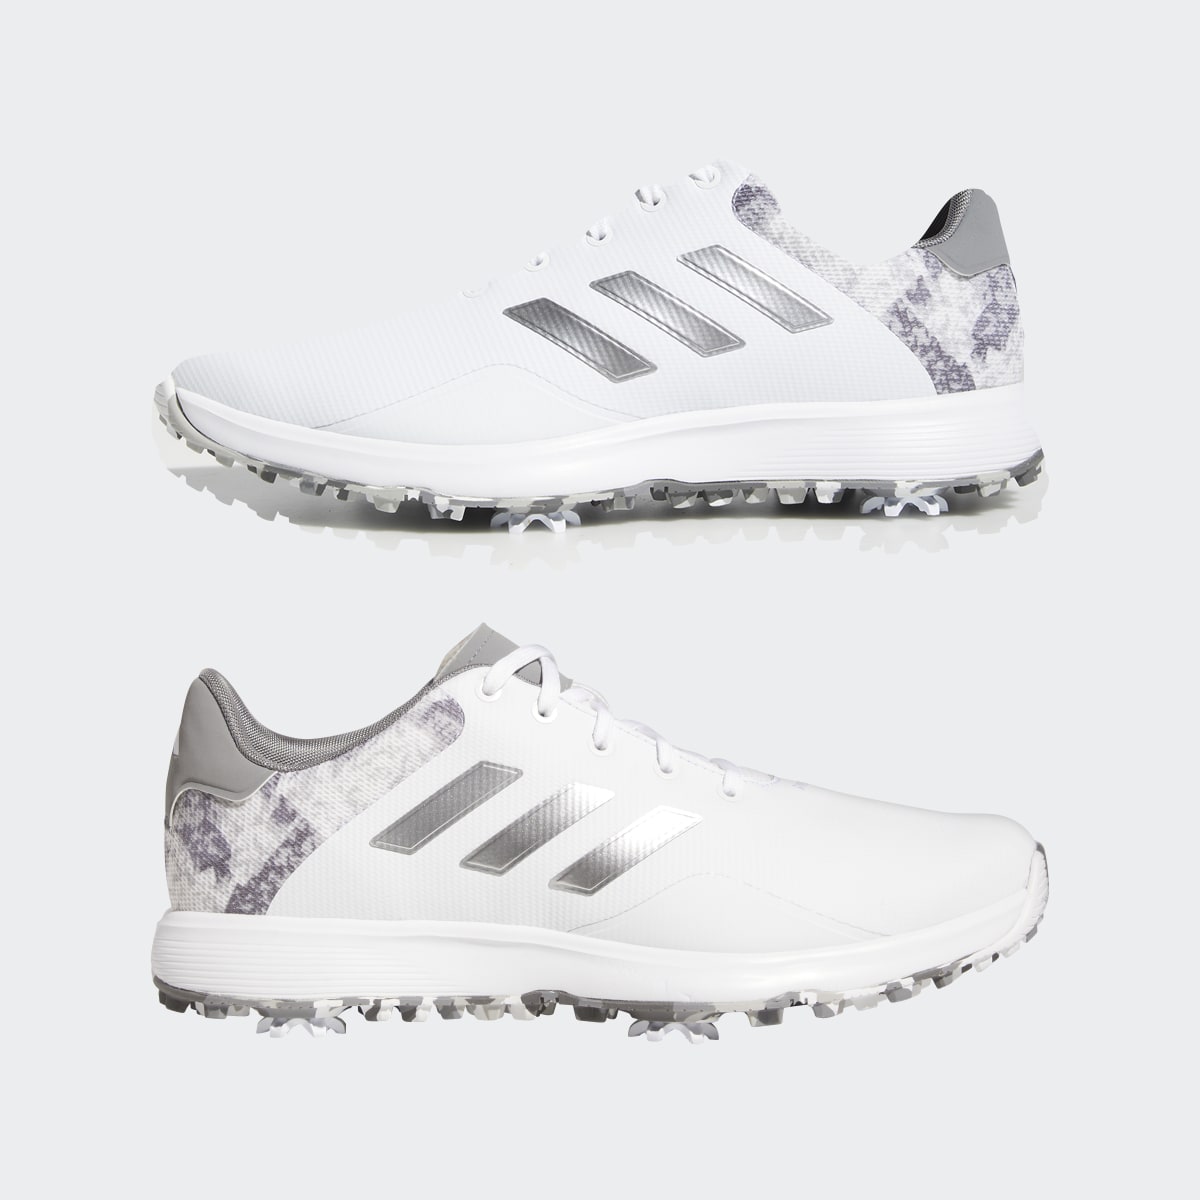 Adidas S2G Golf Shoes. 7